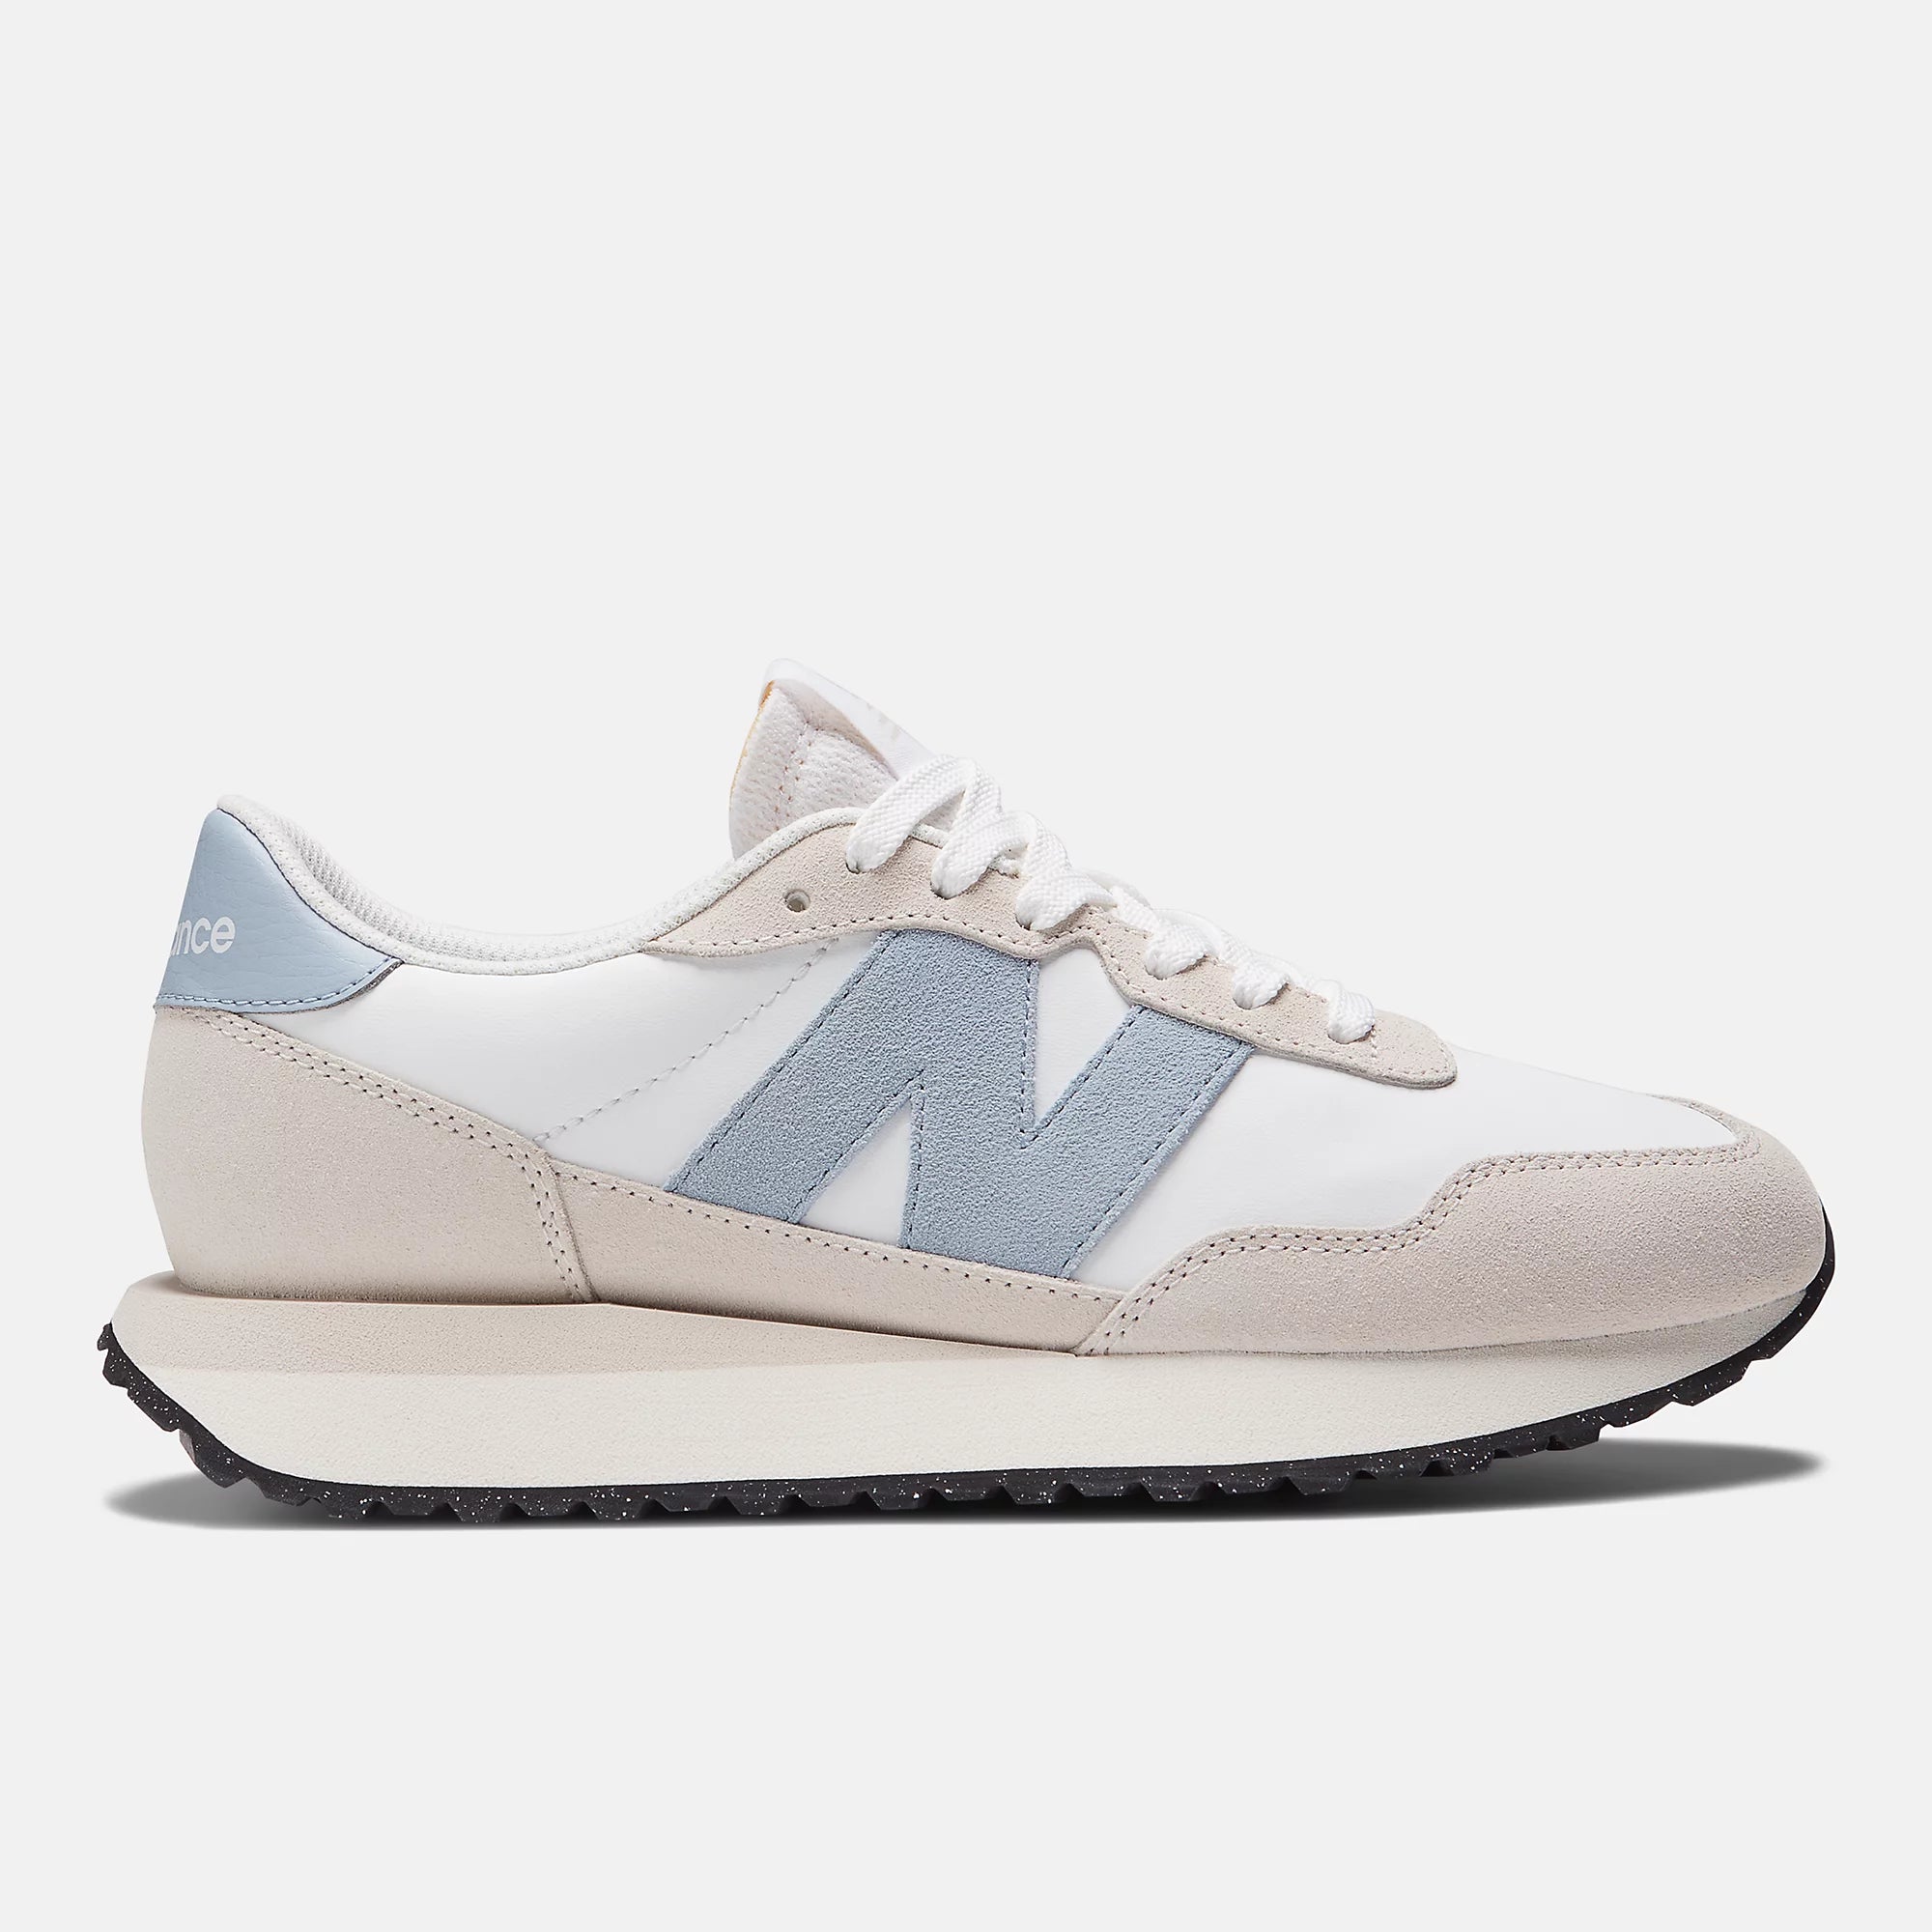 New Balance Womens 237 Fashion Trainers - White / Light Arctic Grey - The Foot Factory